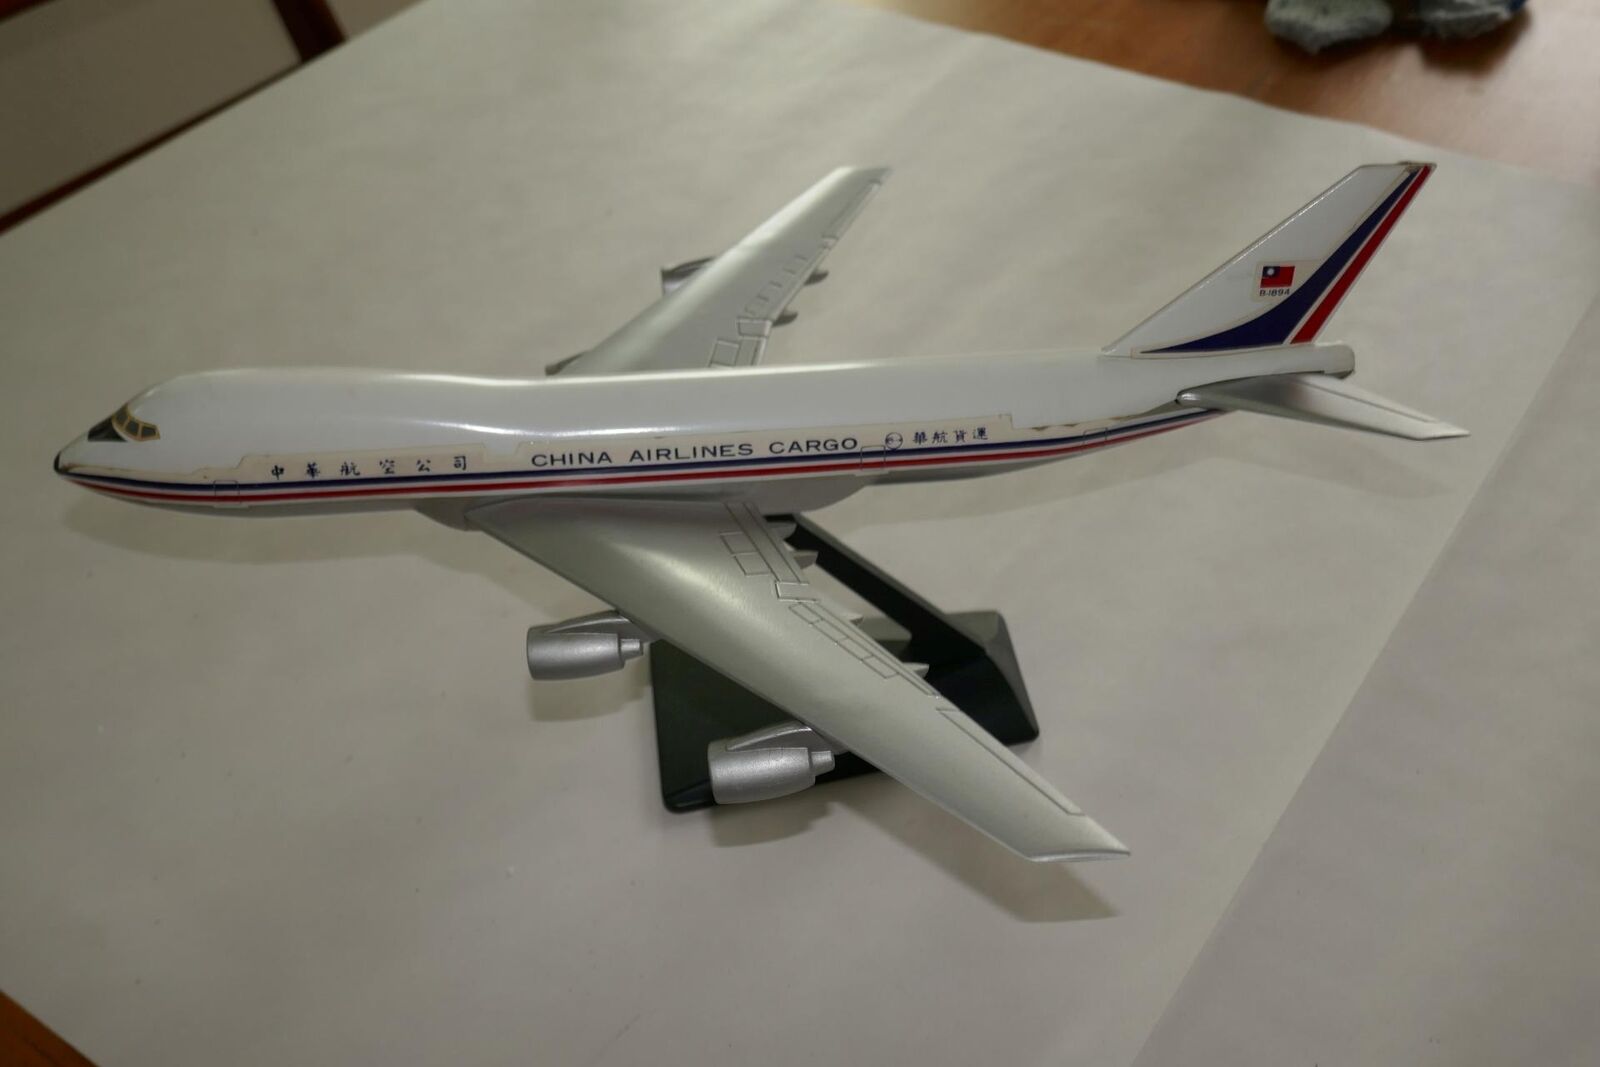 Vintage Airplane Desk Model Boeing 747 China Airlines Cargo